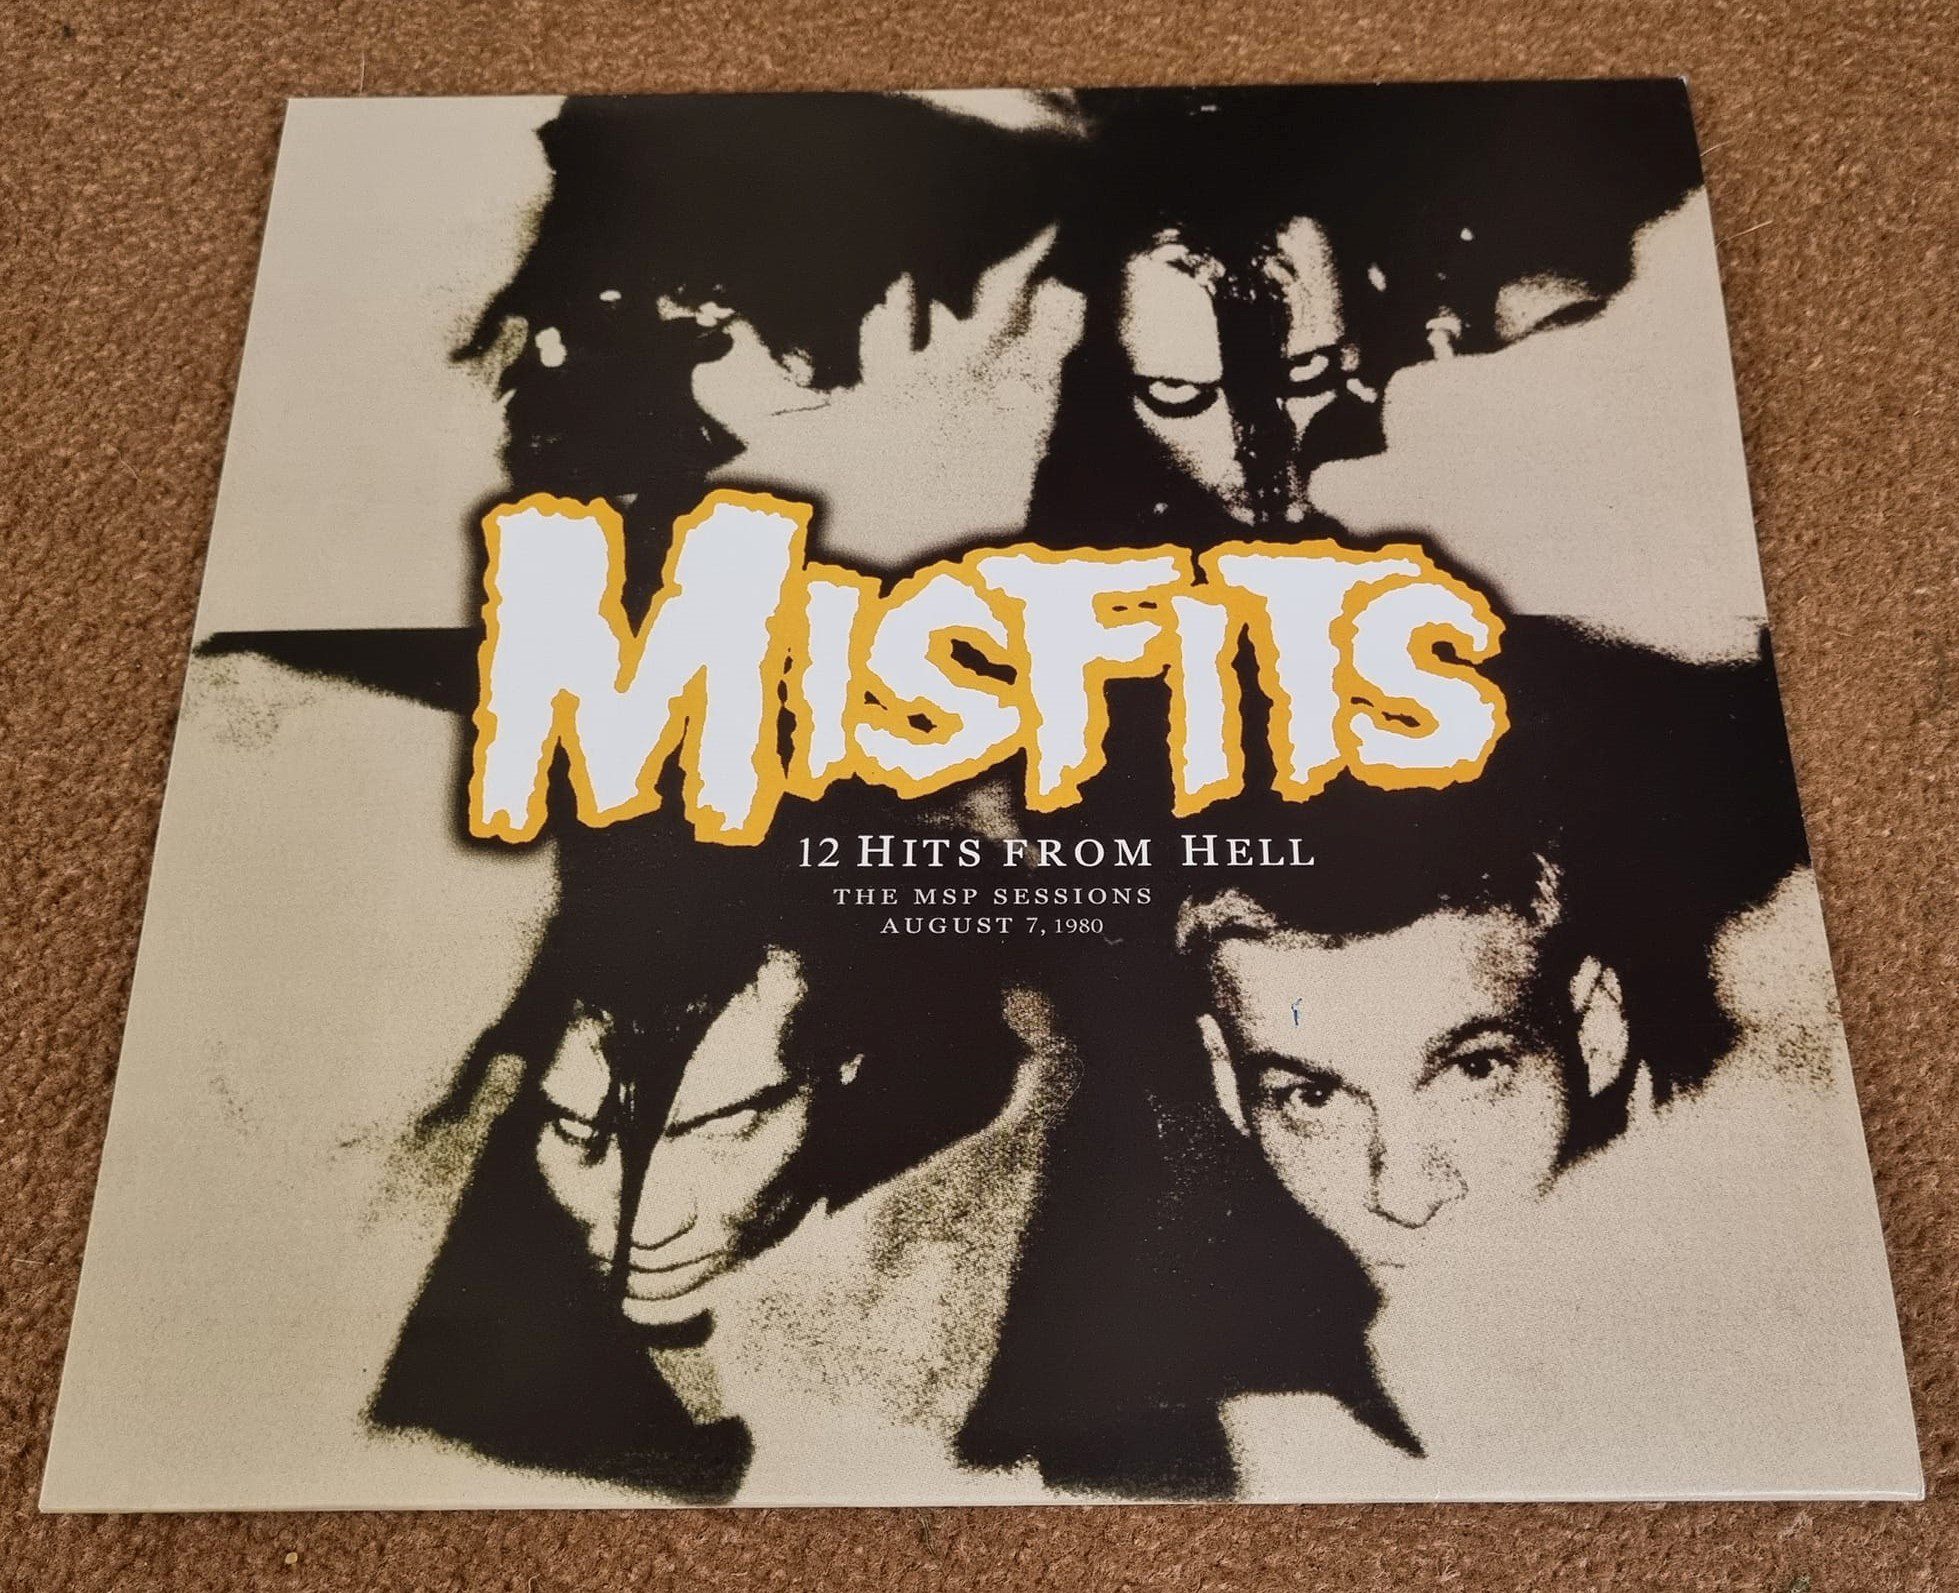 Buy this rare Misfits record by clicking here